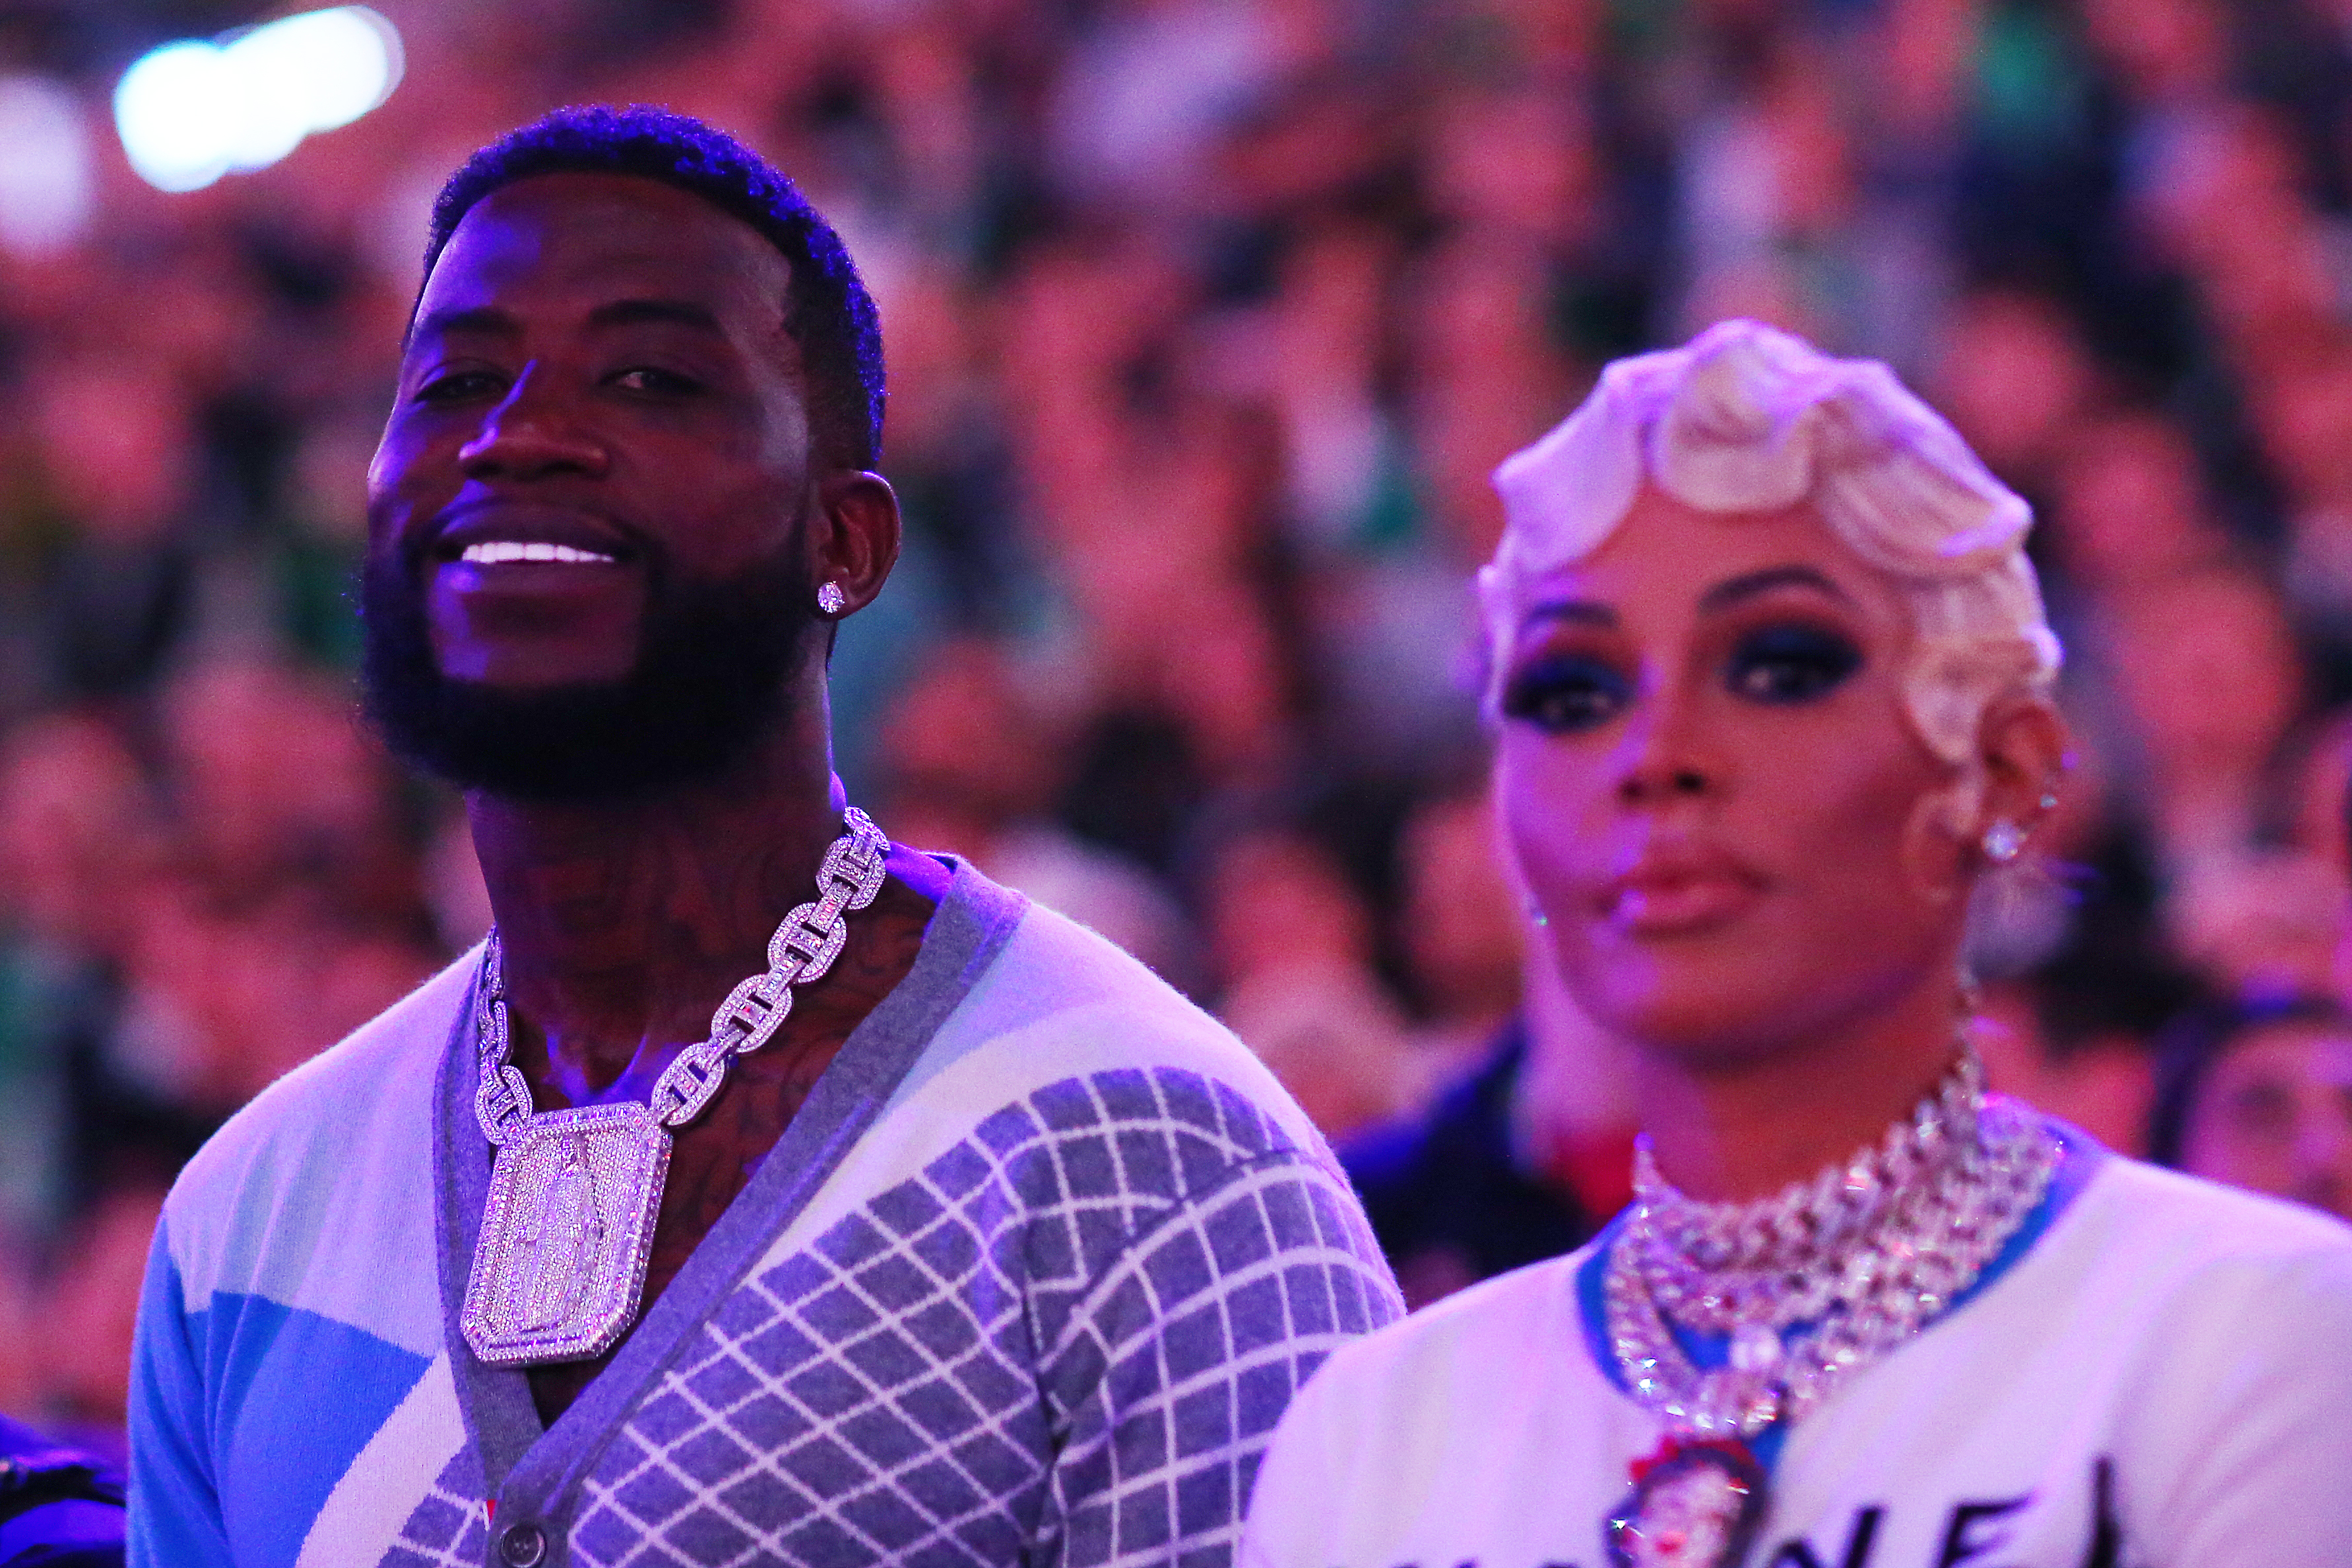 GUCCI MANE, WIFE AND KIDS PROMOTE NEW ALBUM